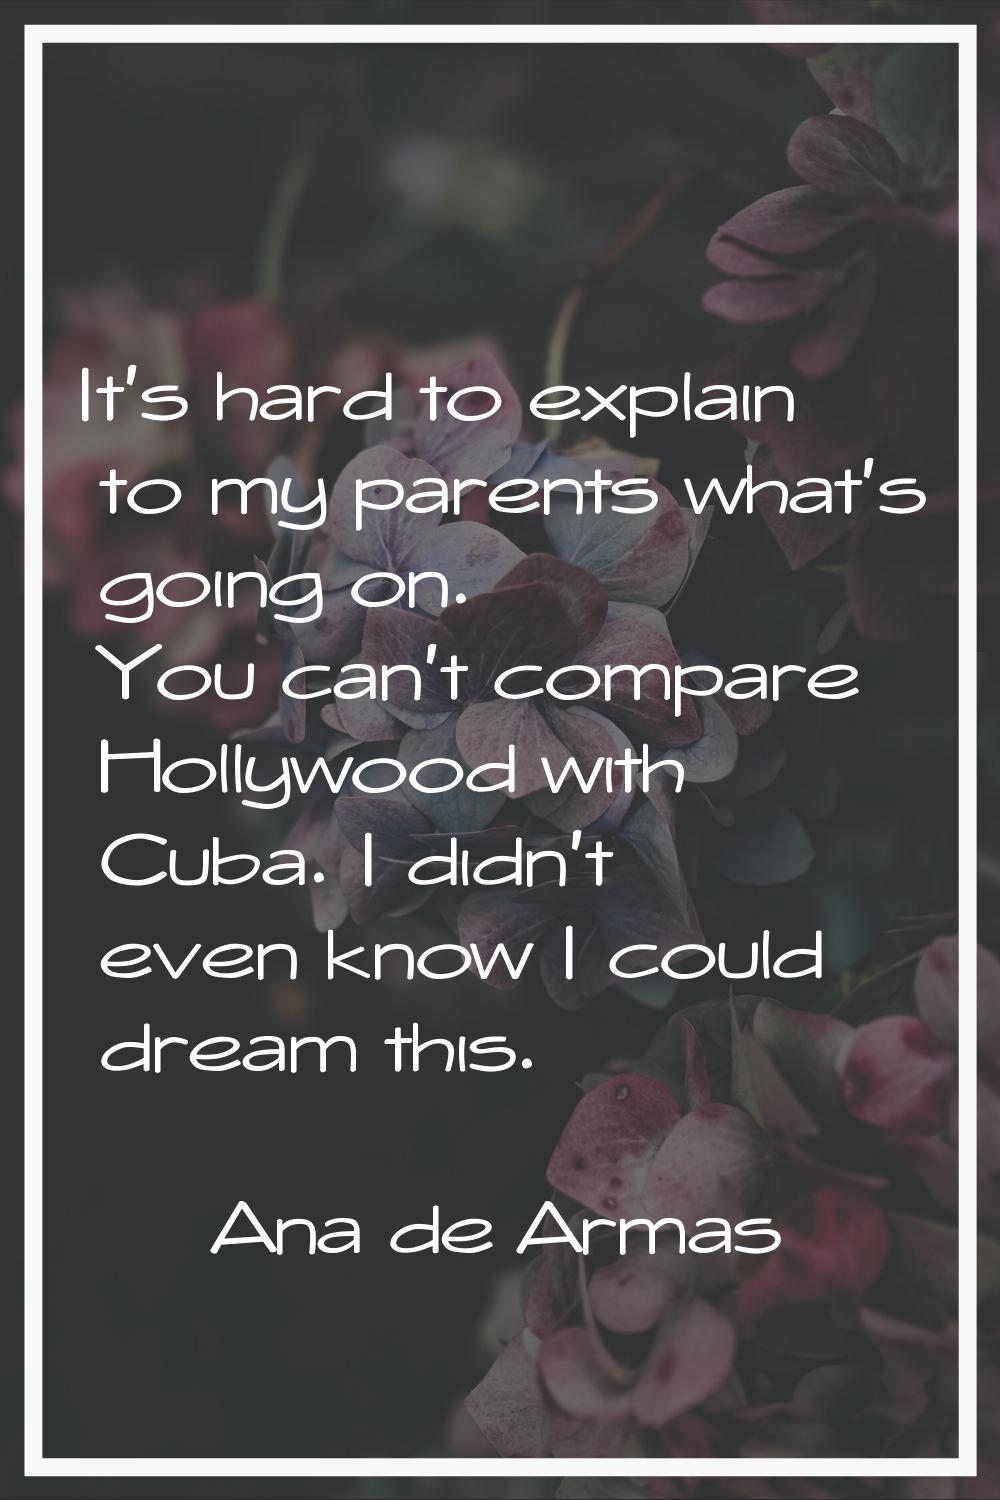 It's hard to explain to my parents what's going on. You can't compare Hollywood with Cuba. I didn't